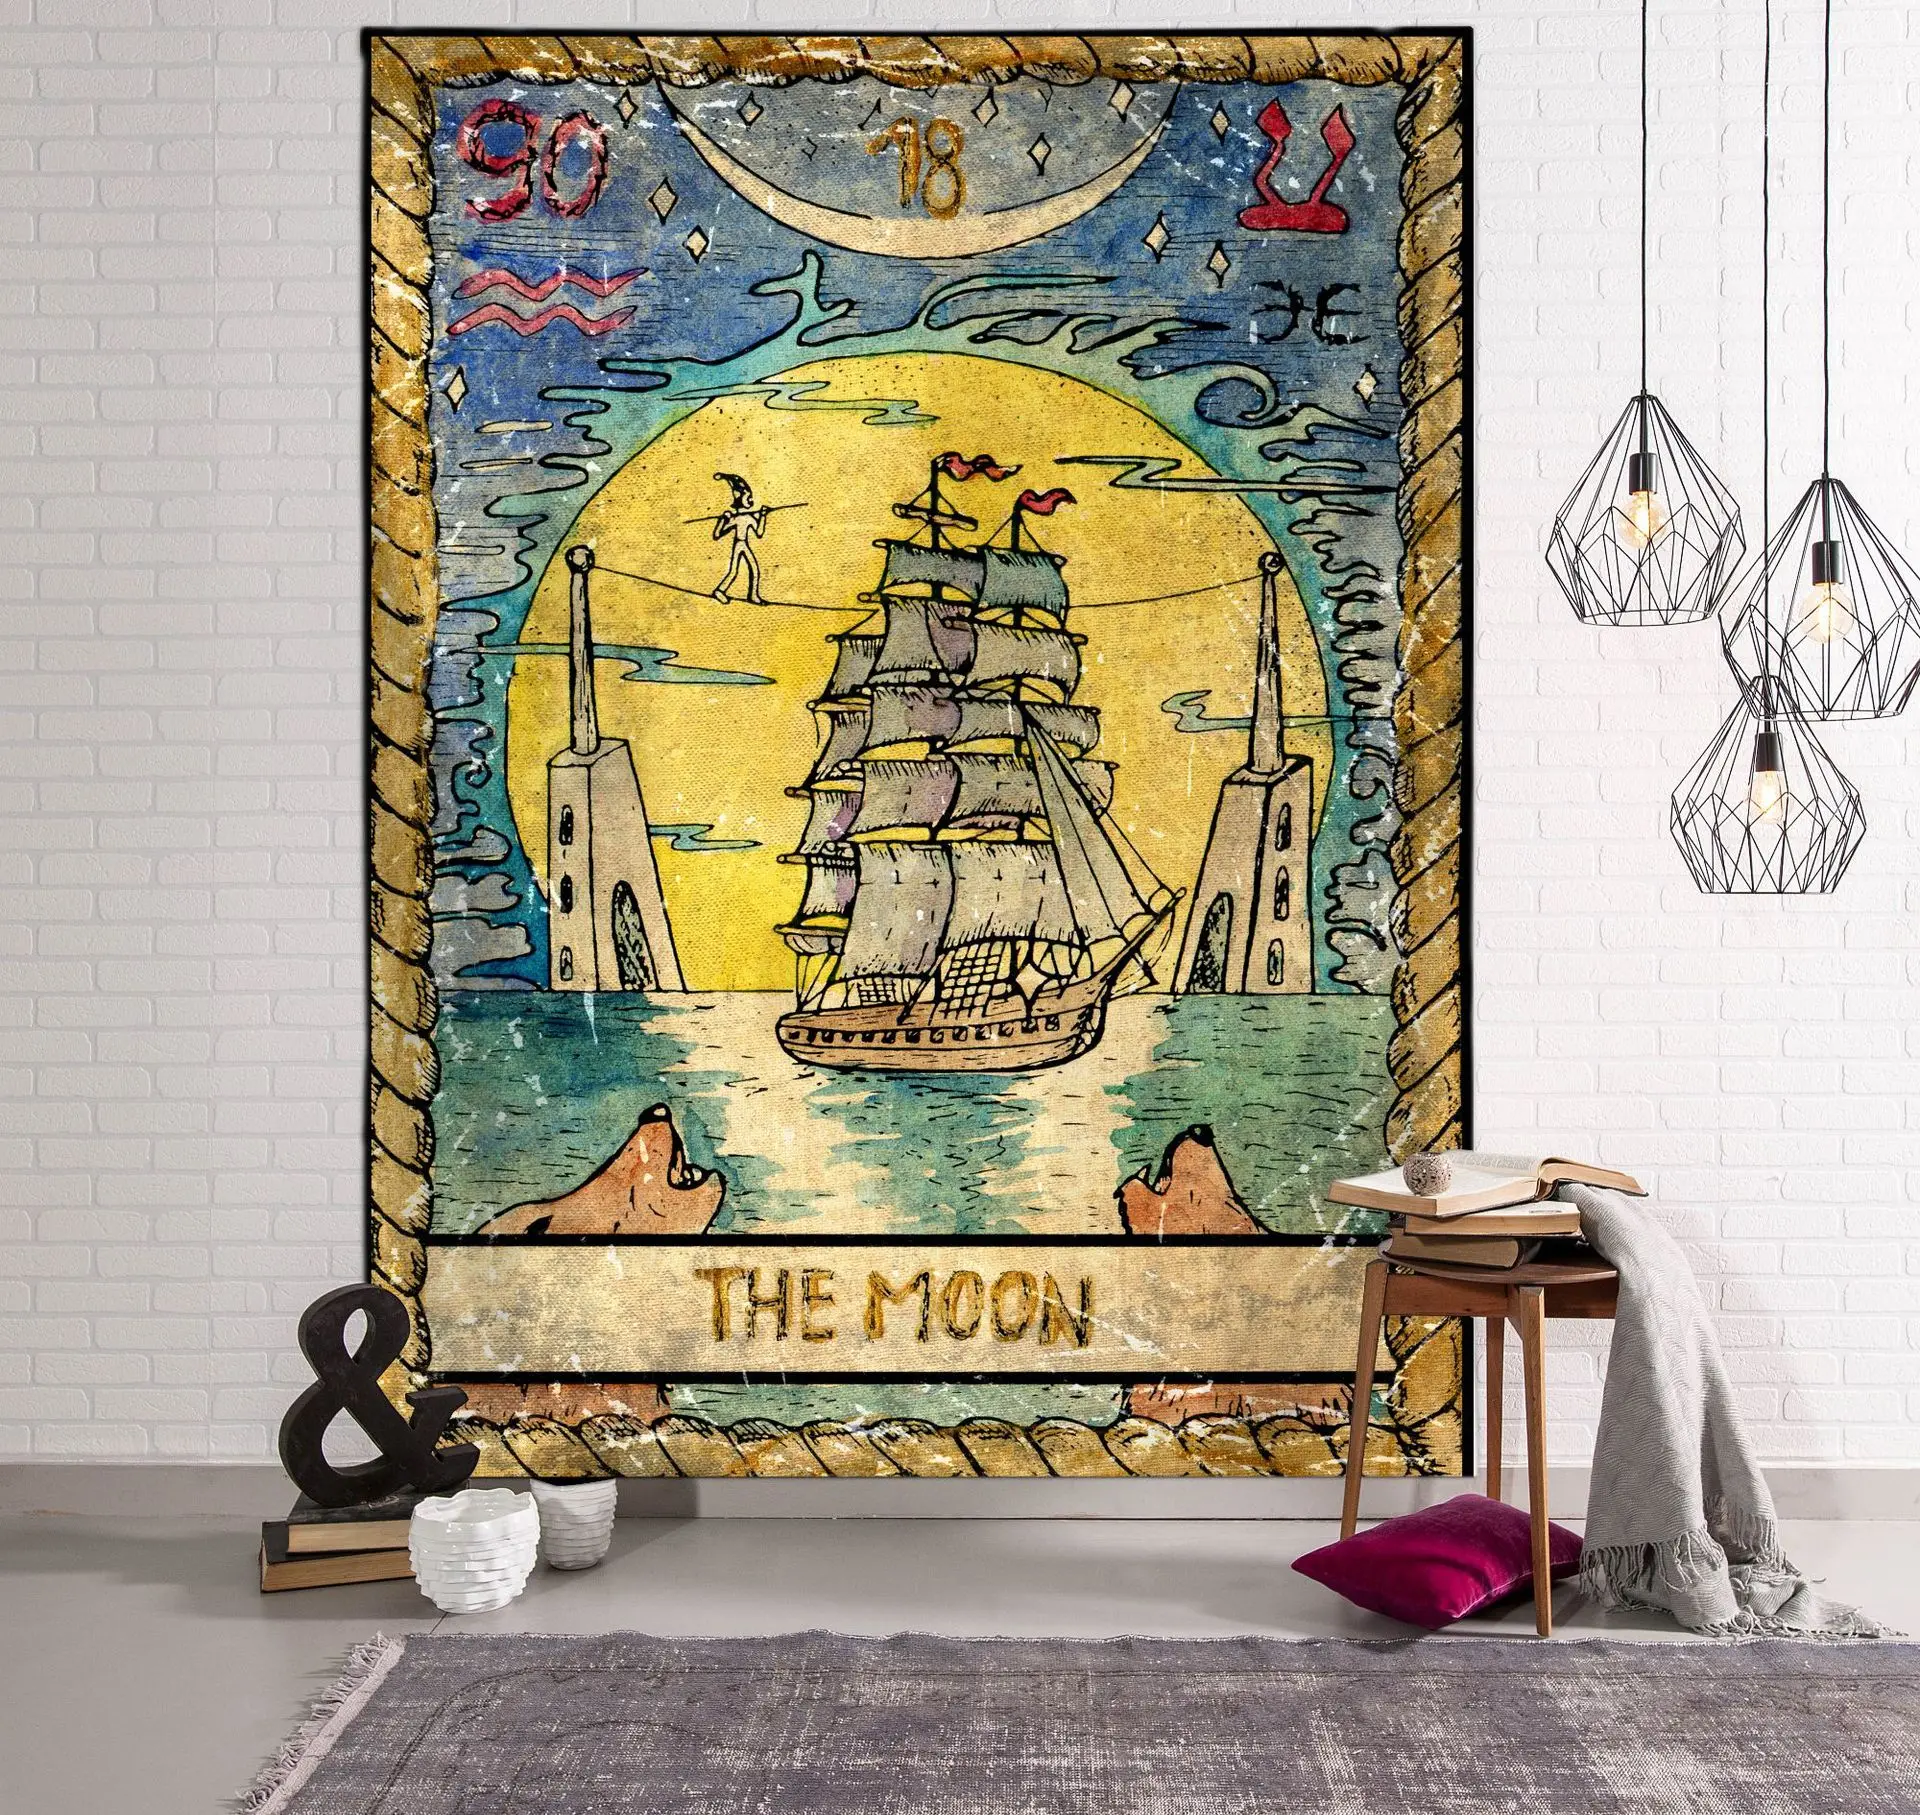 

Tarot card psychedelic scene home decoration art tapestry hippie bohemian decoration divination wall hanging sheets